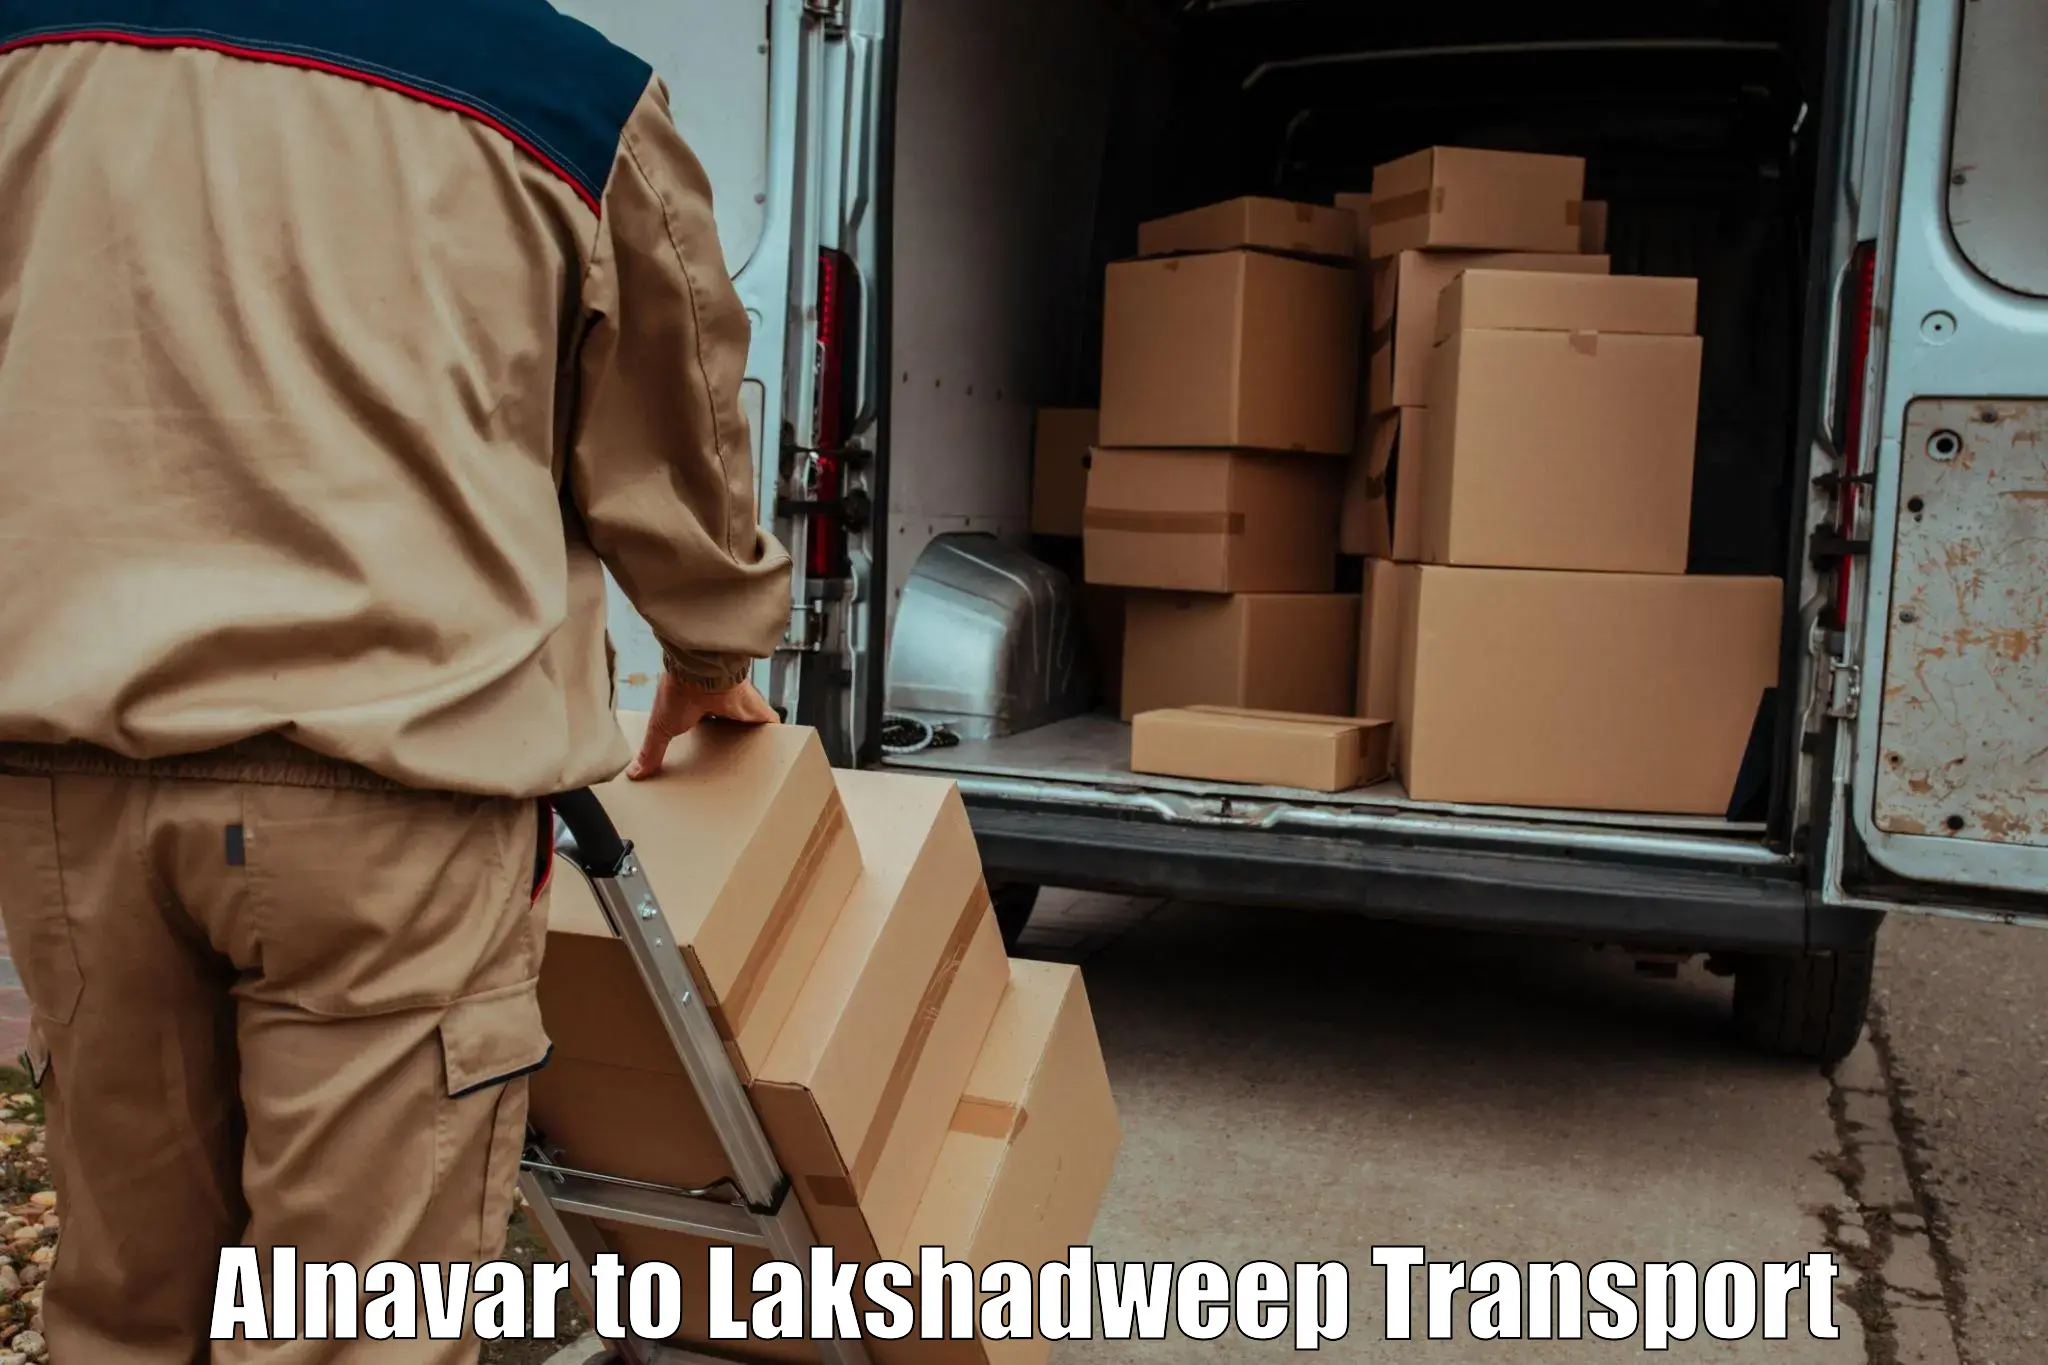 Goods delivery service Alnavar to Lakshadweep